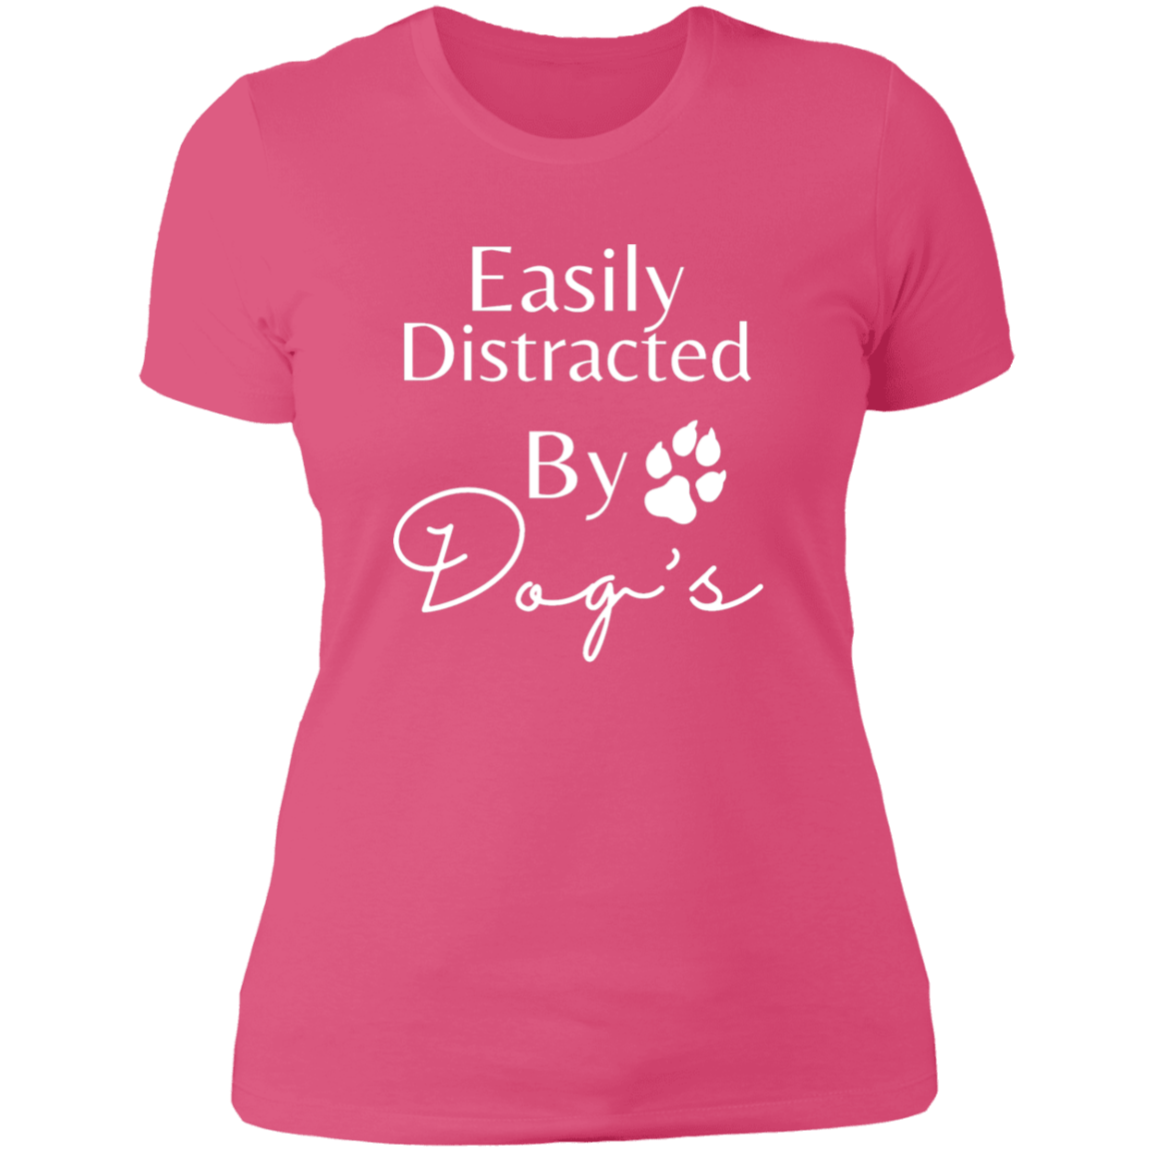 Easily Distracted by Dogs Women's Tee wht letters